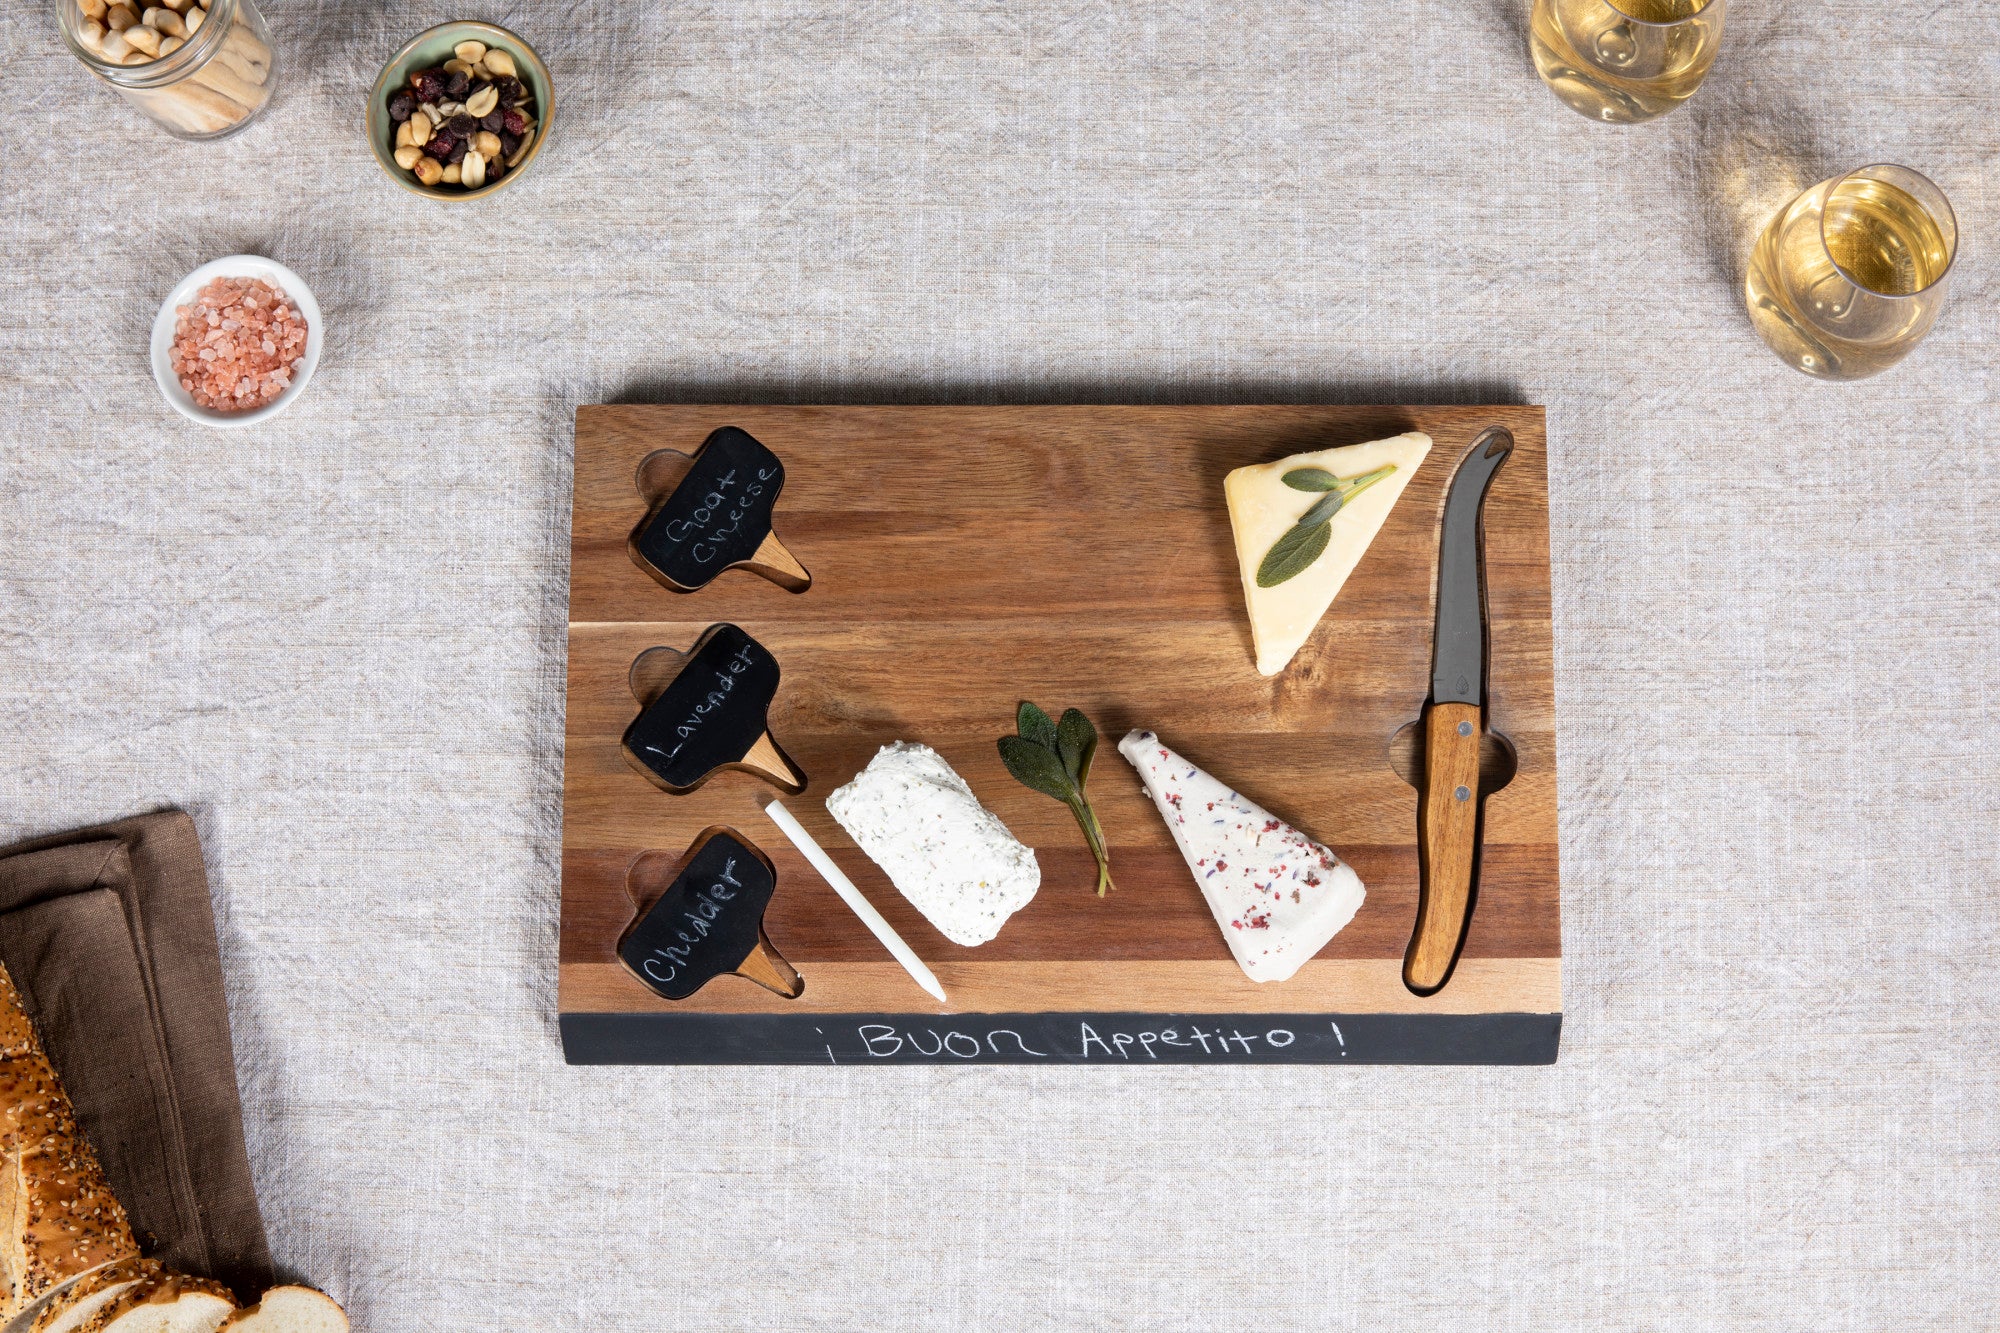 Wake Forest Demon Deacons - Delio Acacia Cheese Cutting Board & Tools Set